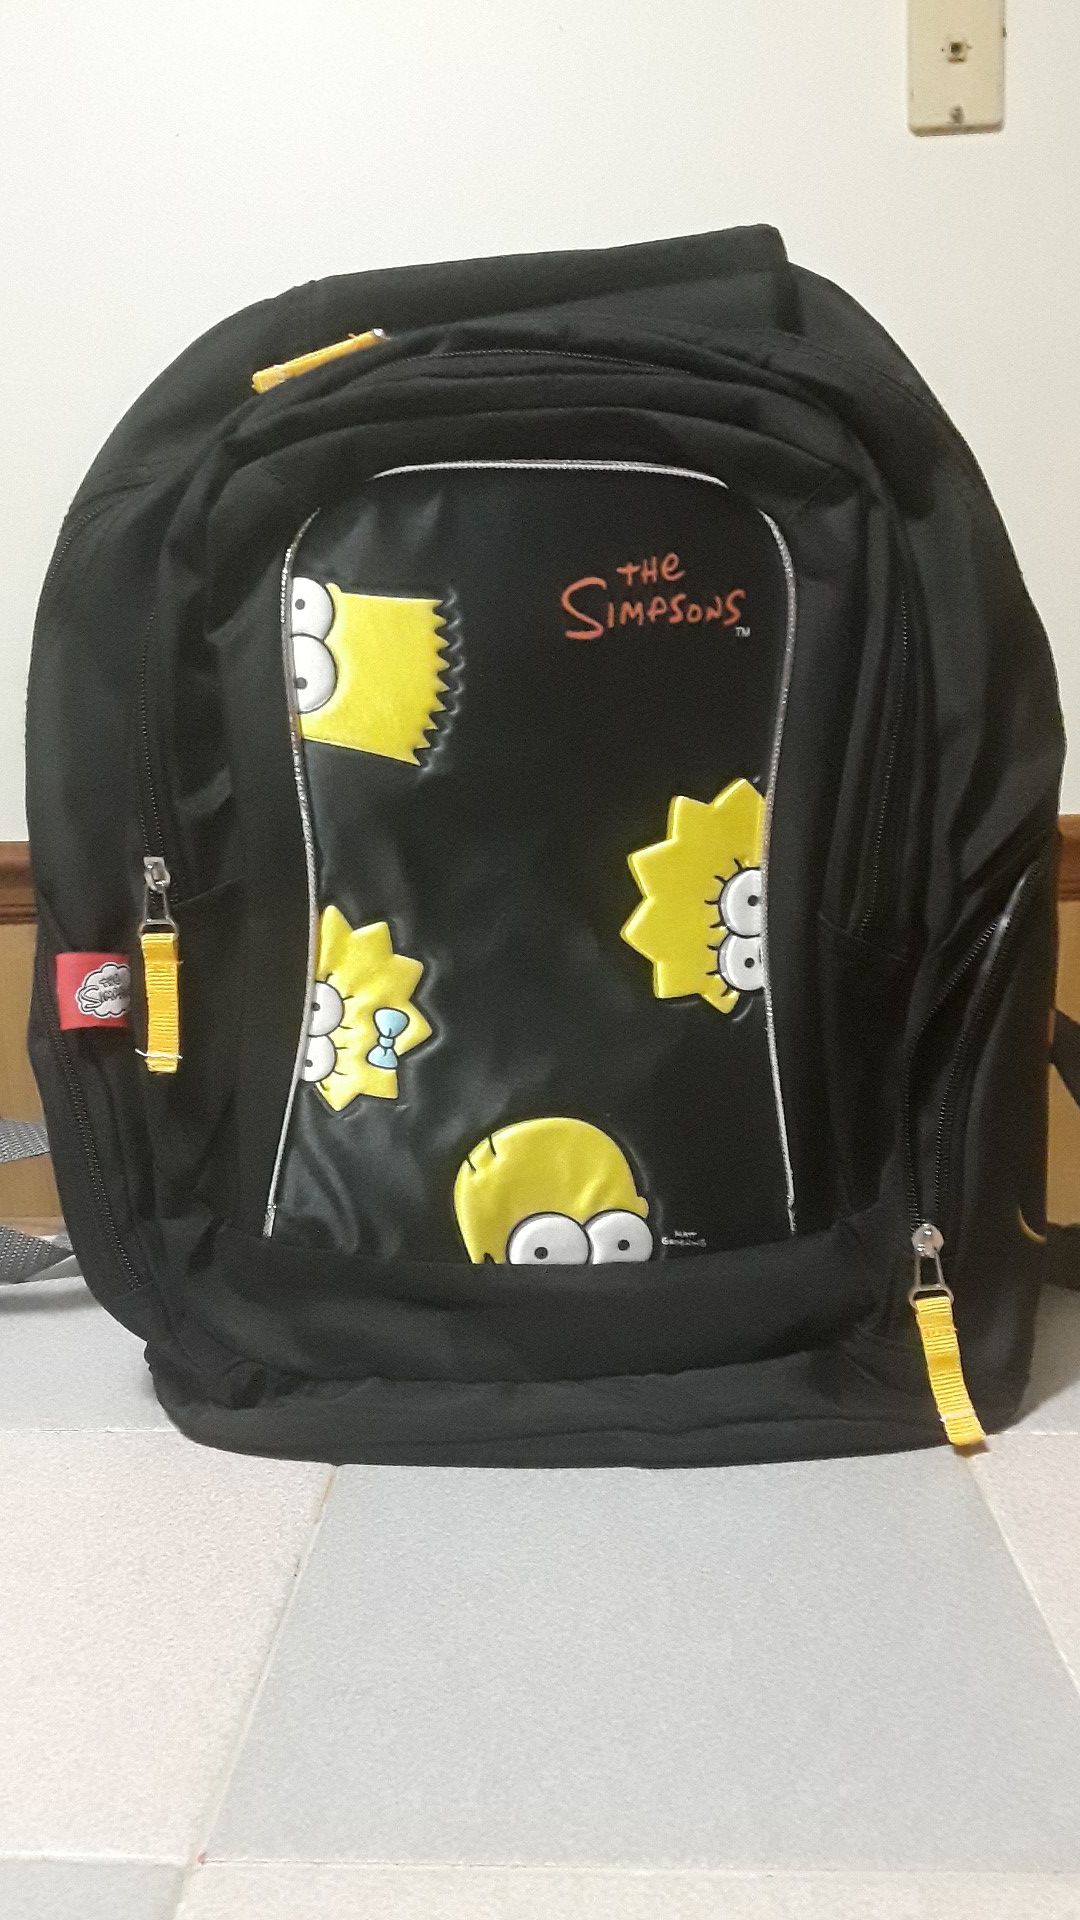 Backpack of the simpsons